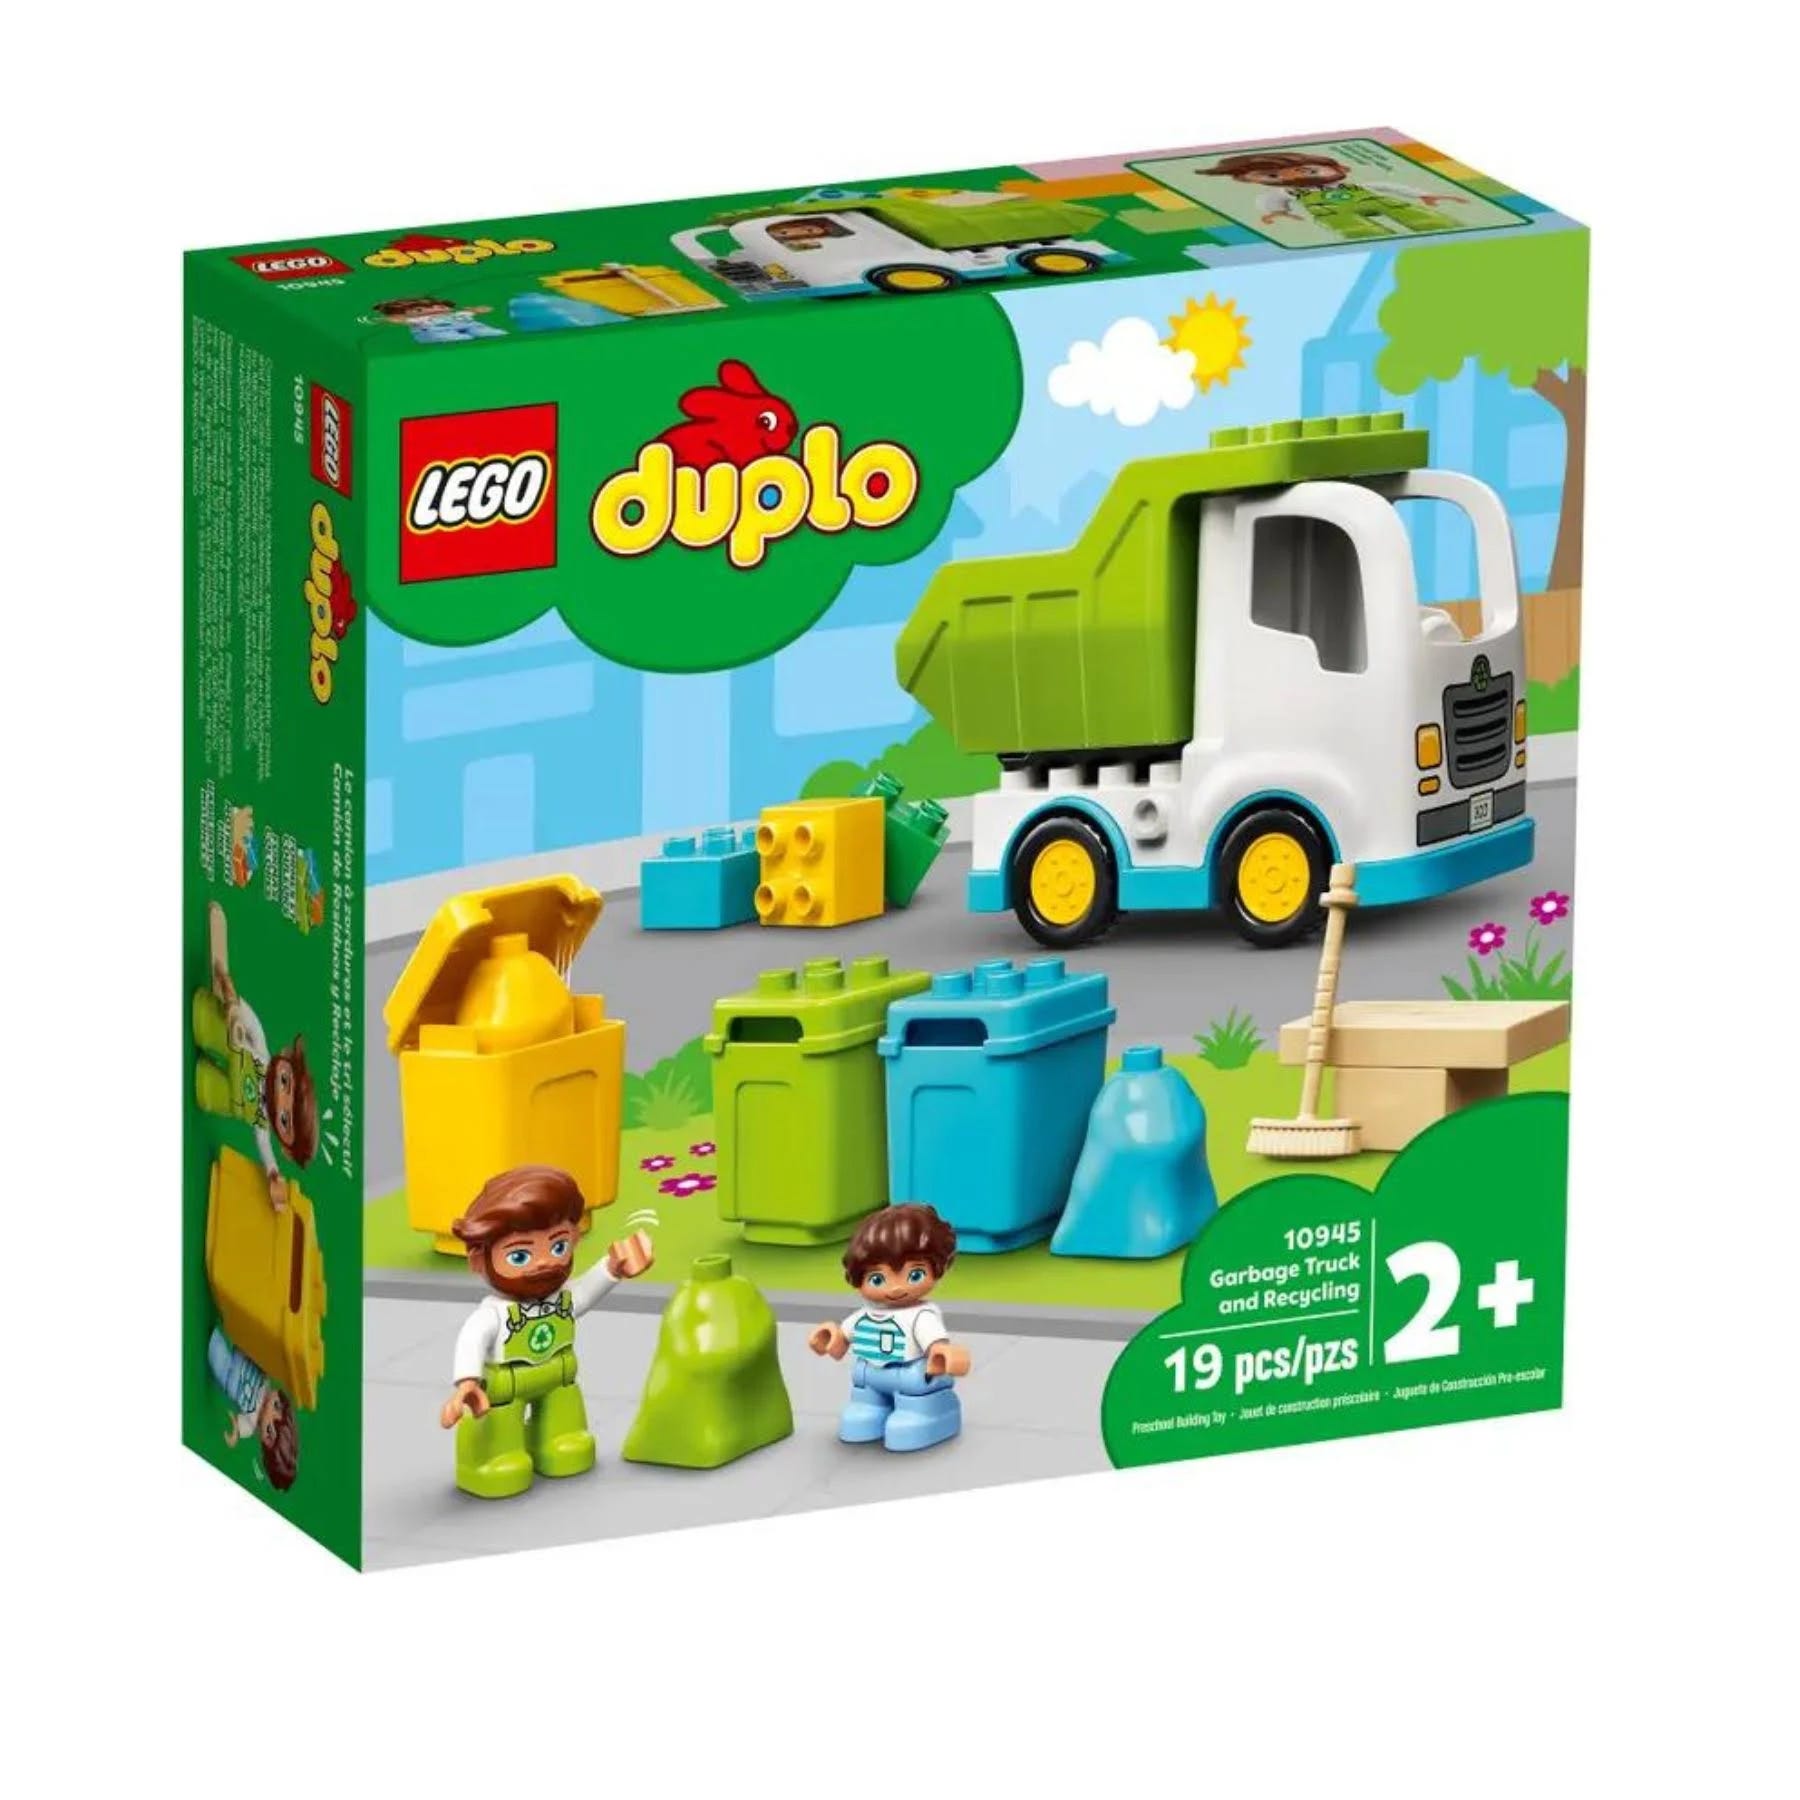 Introducing the Duplo Recycling Truck by Lego | Image